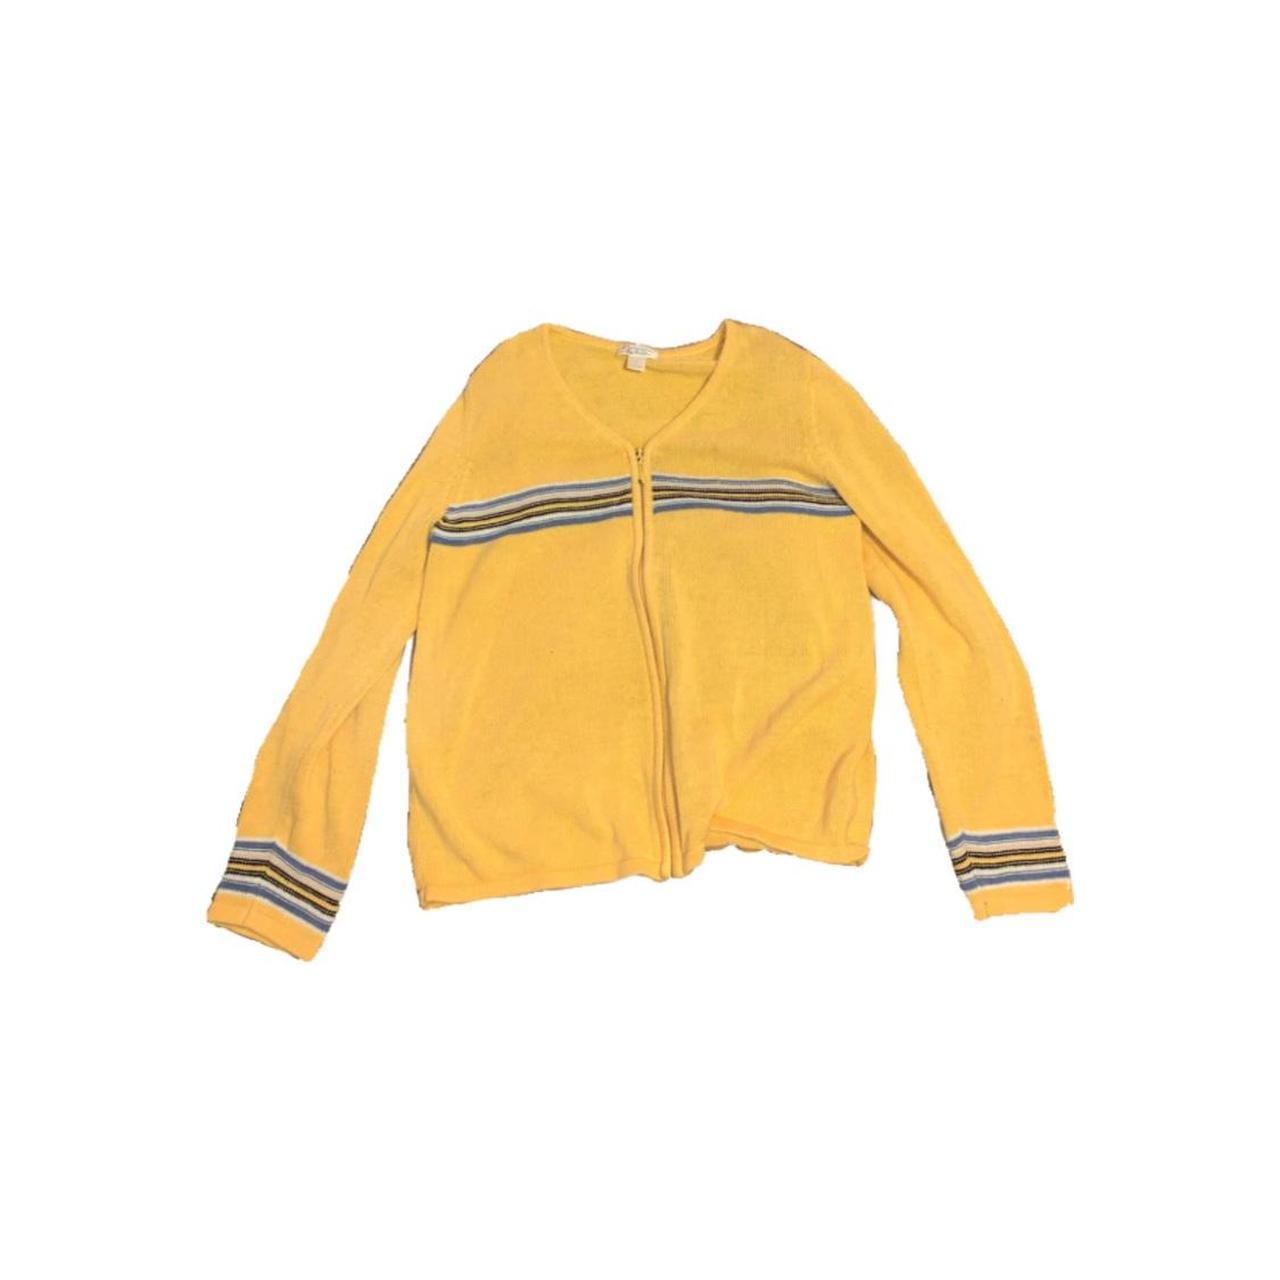 Crate Clothing Women's Yellow and Navy Jacket (2)